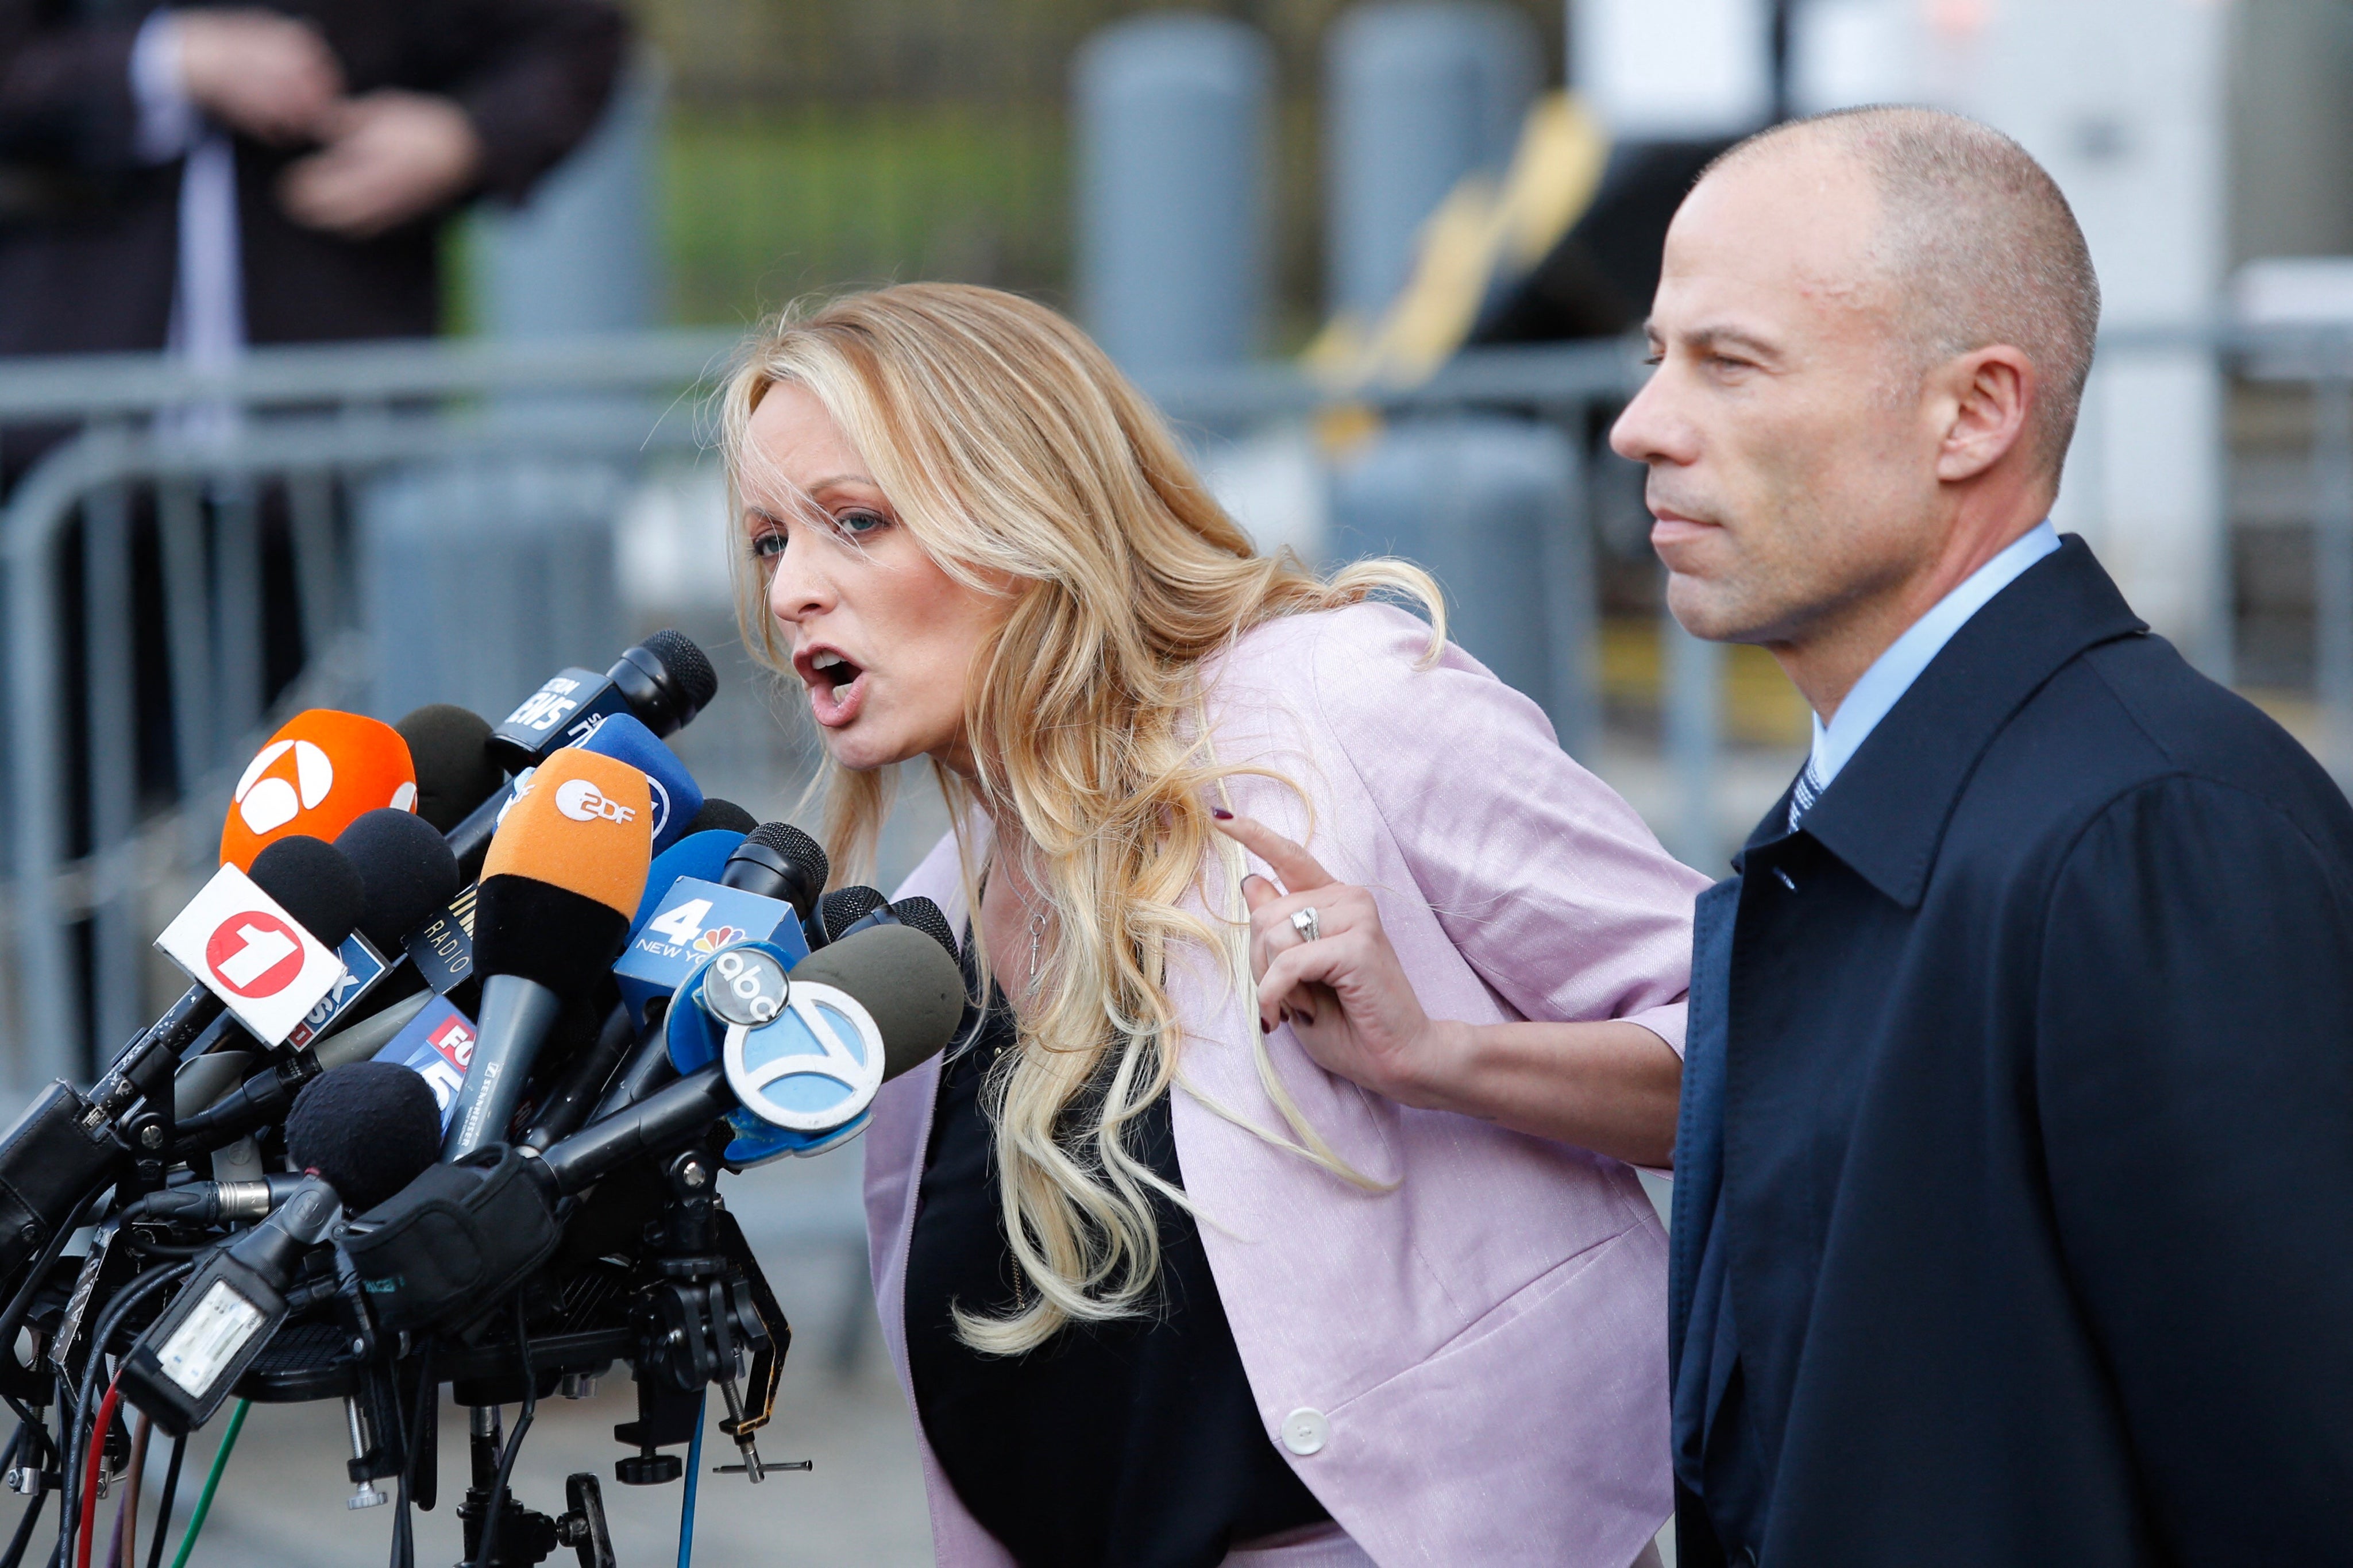 Stormy Daniels, speaks outside US Federal Court with her lawyer Michael Avenatti in 2018